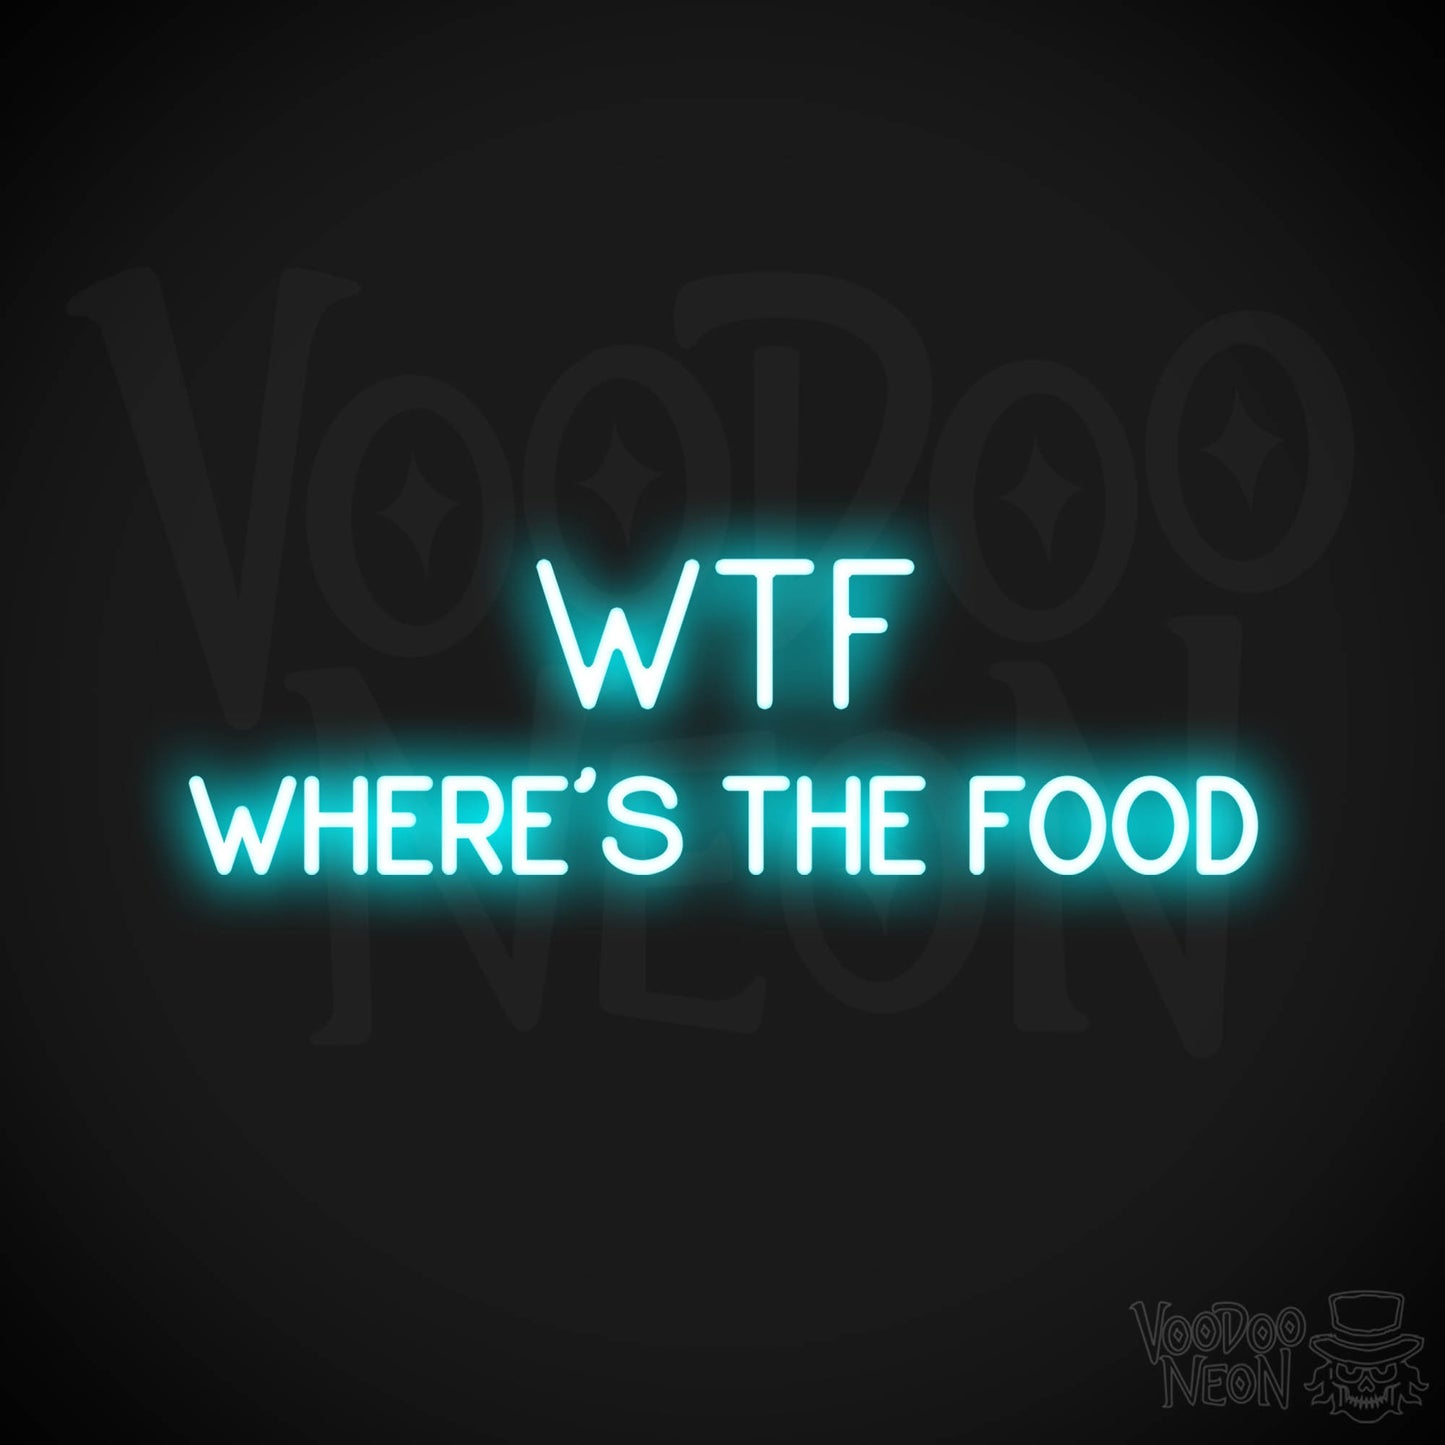 Wtf (Wheres The Food) LED Neon - Ice Blue